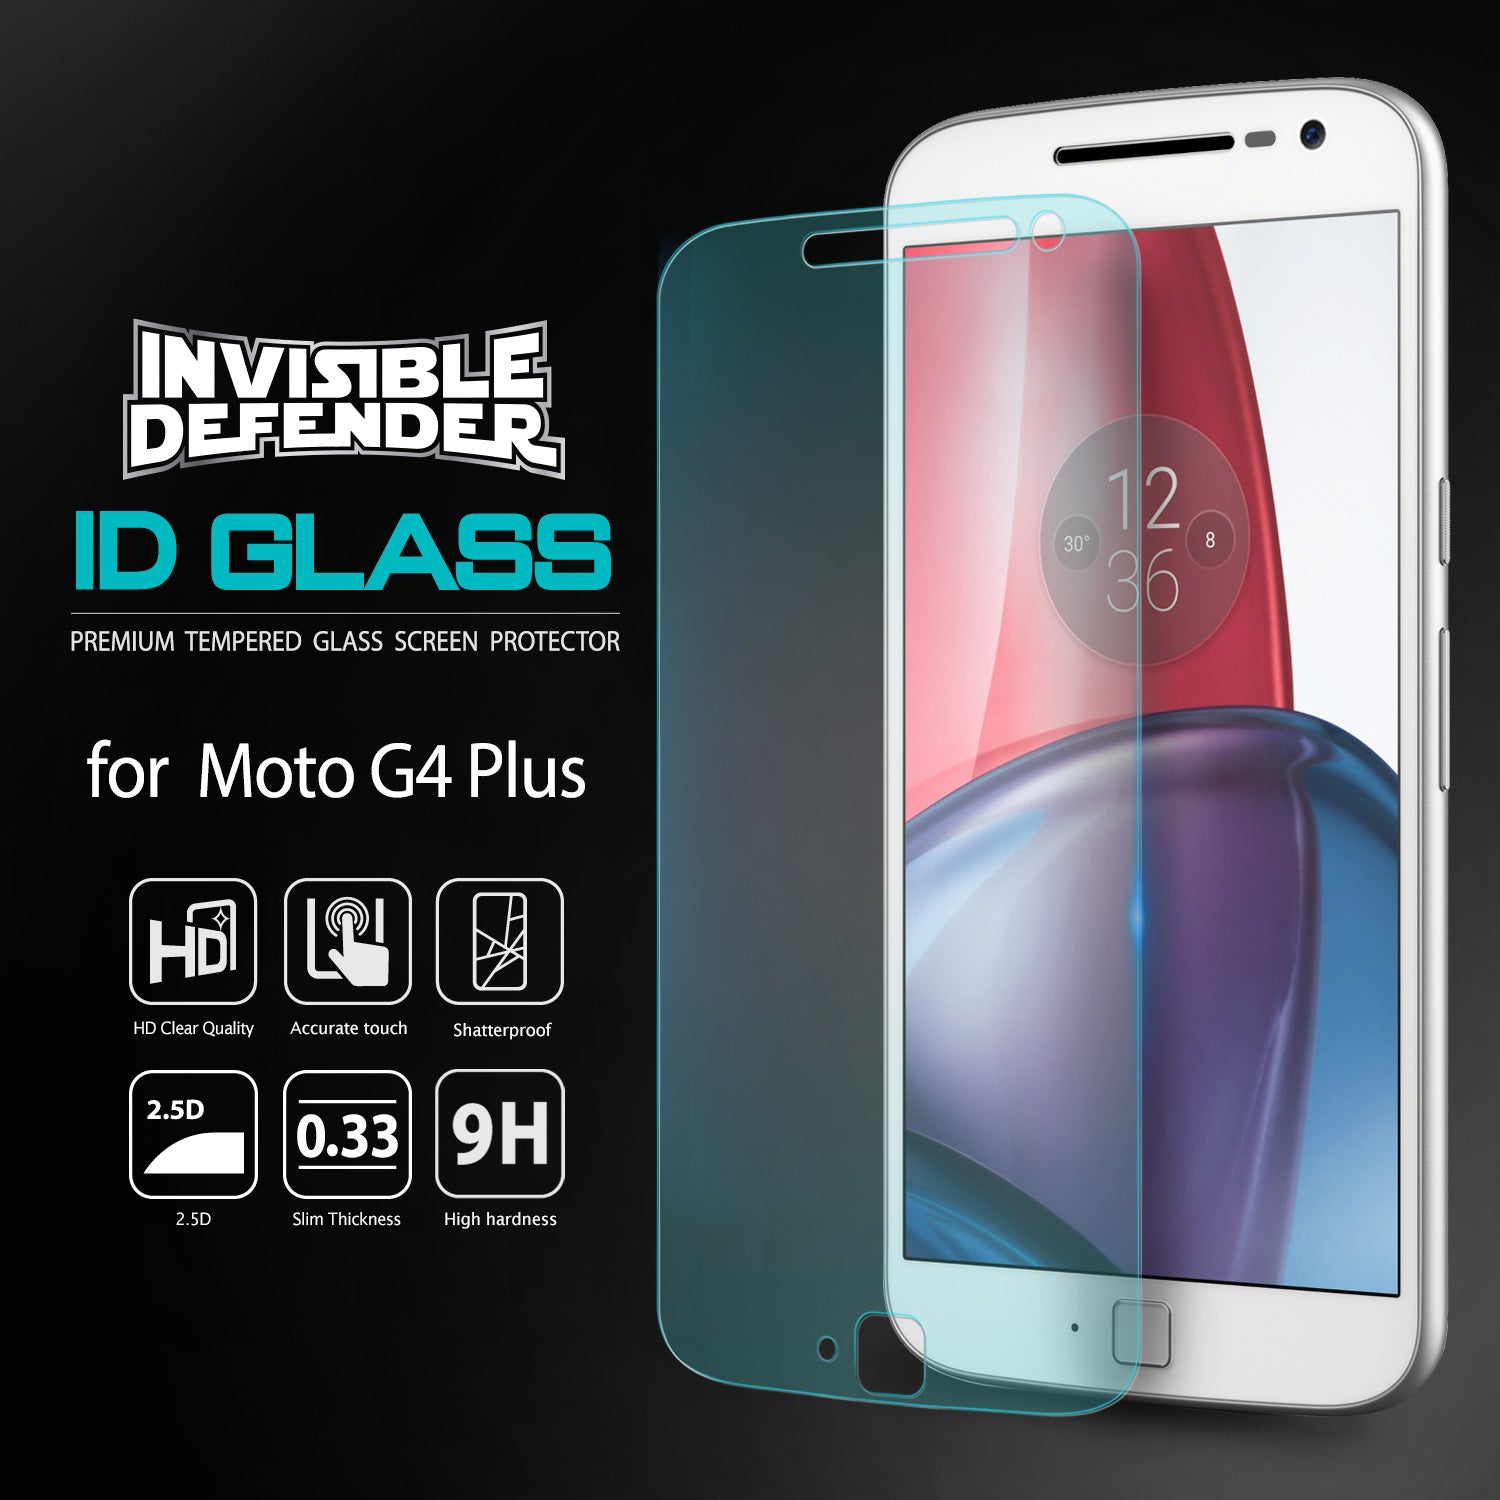 ringke invisible defender tempered glass screen protector for moto g4 plus